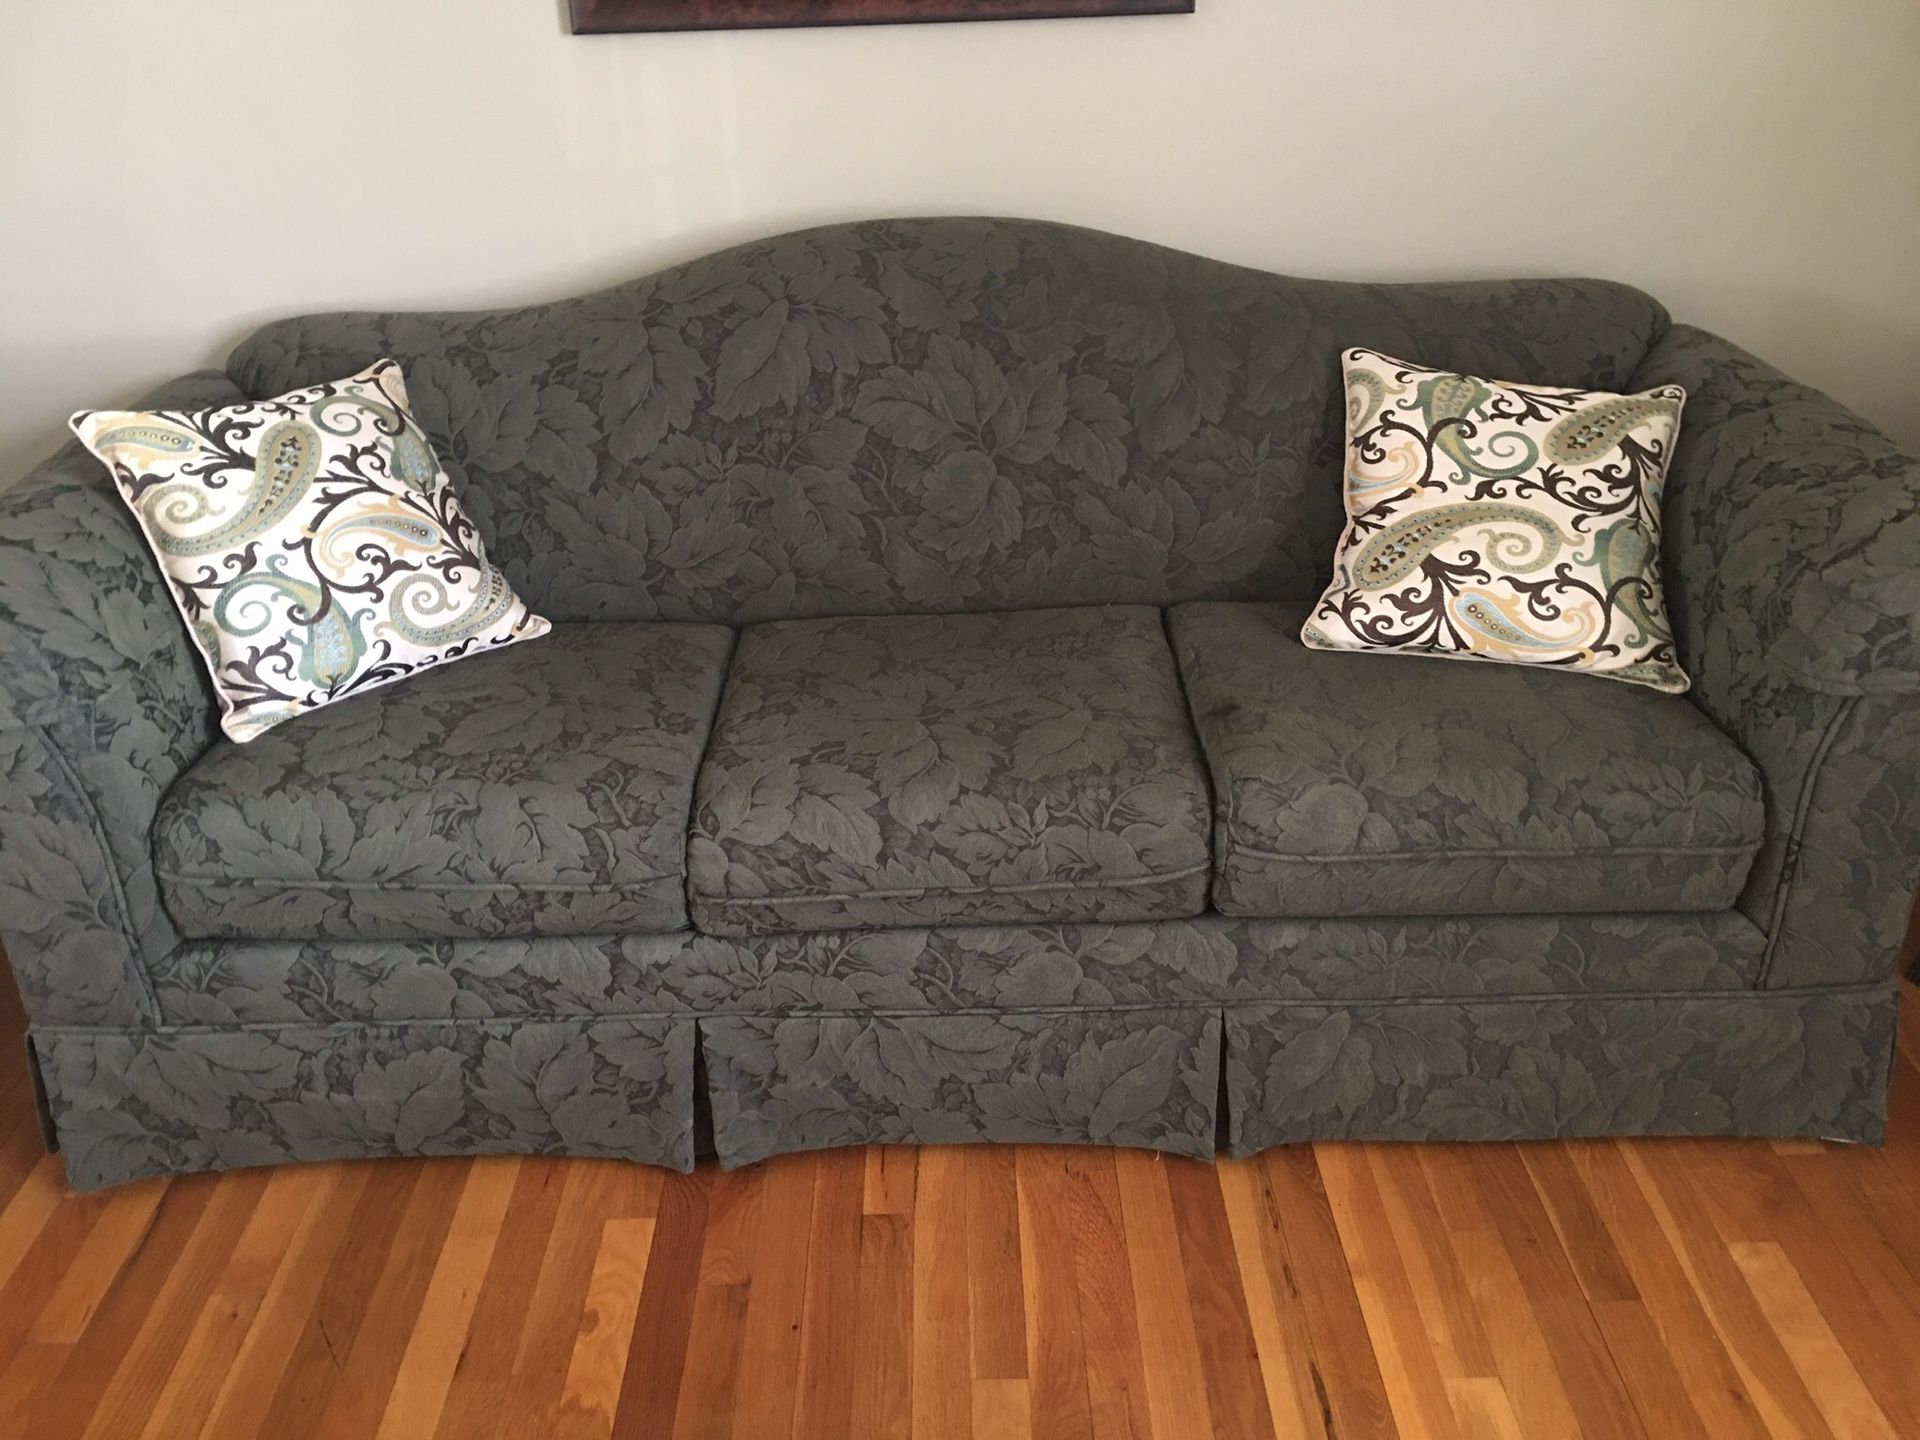 Beautiful custom made couch by basset!